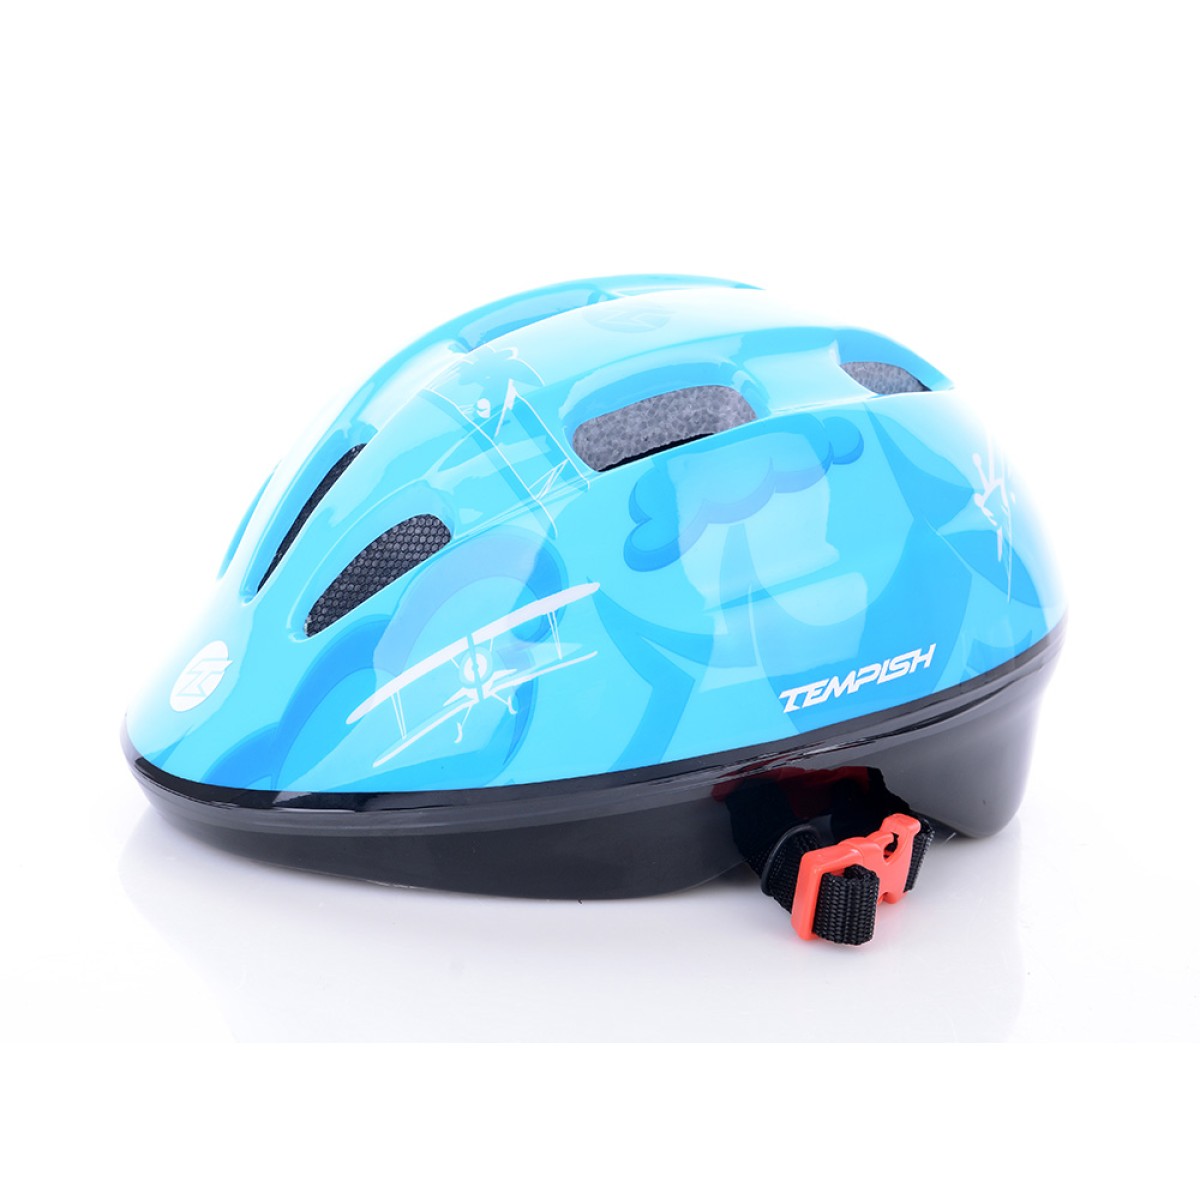 RAYBOW helmet for boards, skates or bicycles blue TEMPISH - view 6